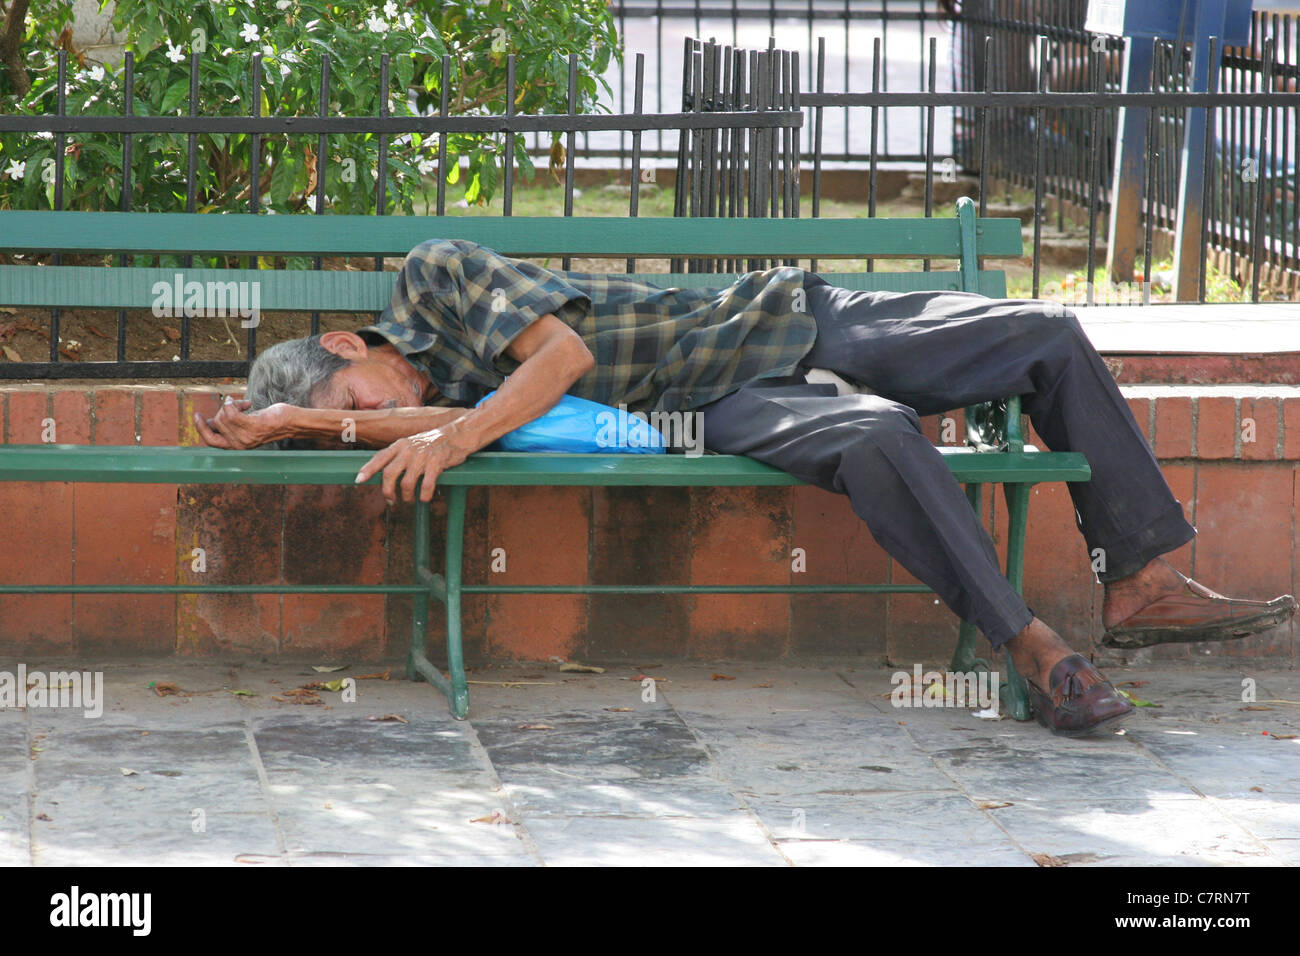 Homeless Man Sleeping In A Park Bench Stock Photo Alamy